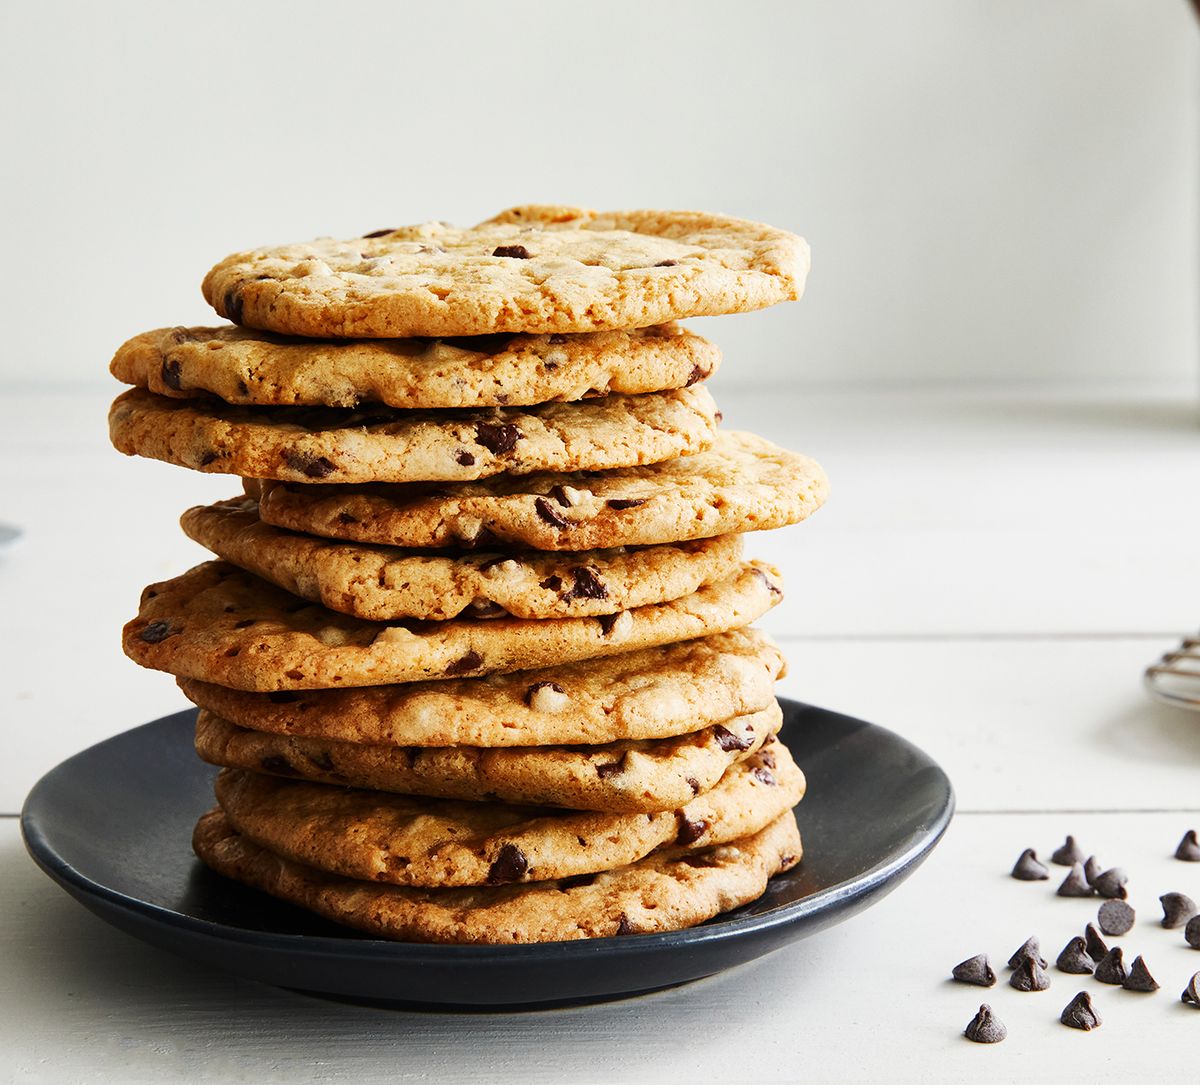 a pile of chocolate chip cookies